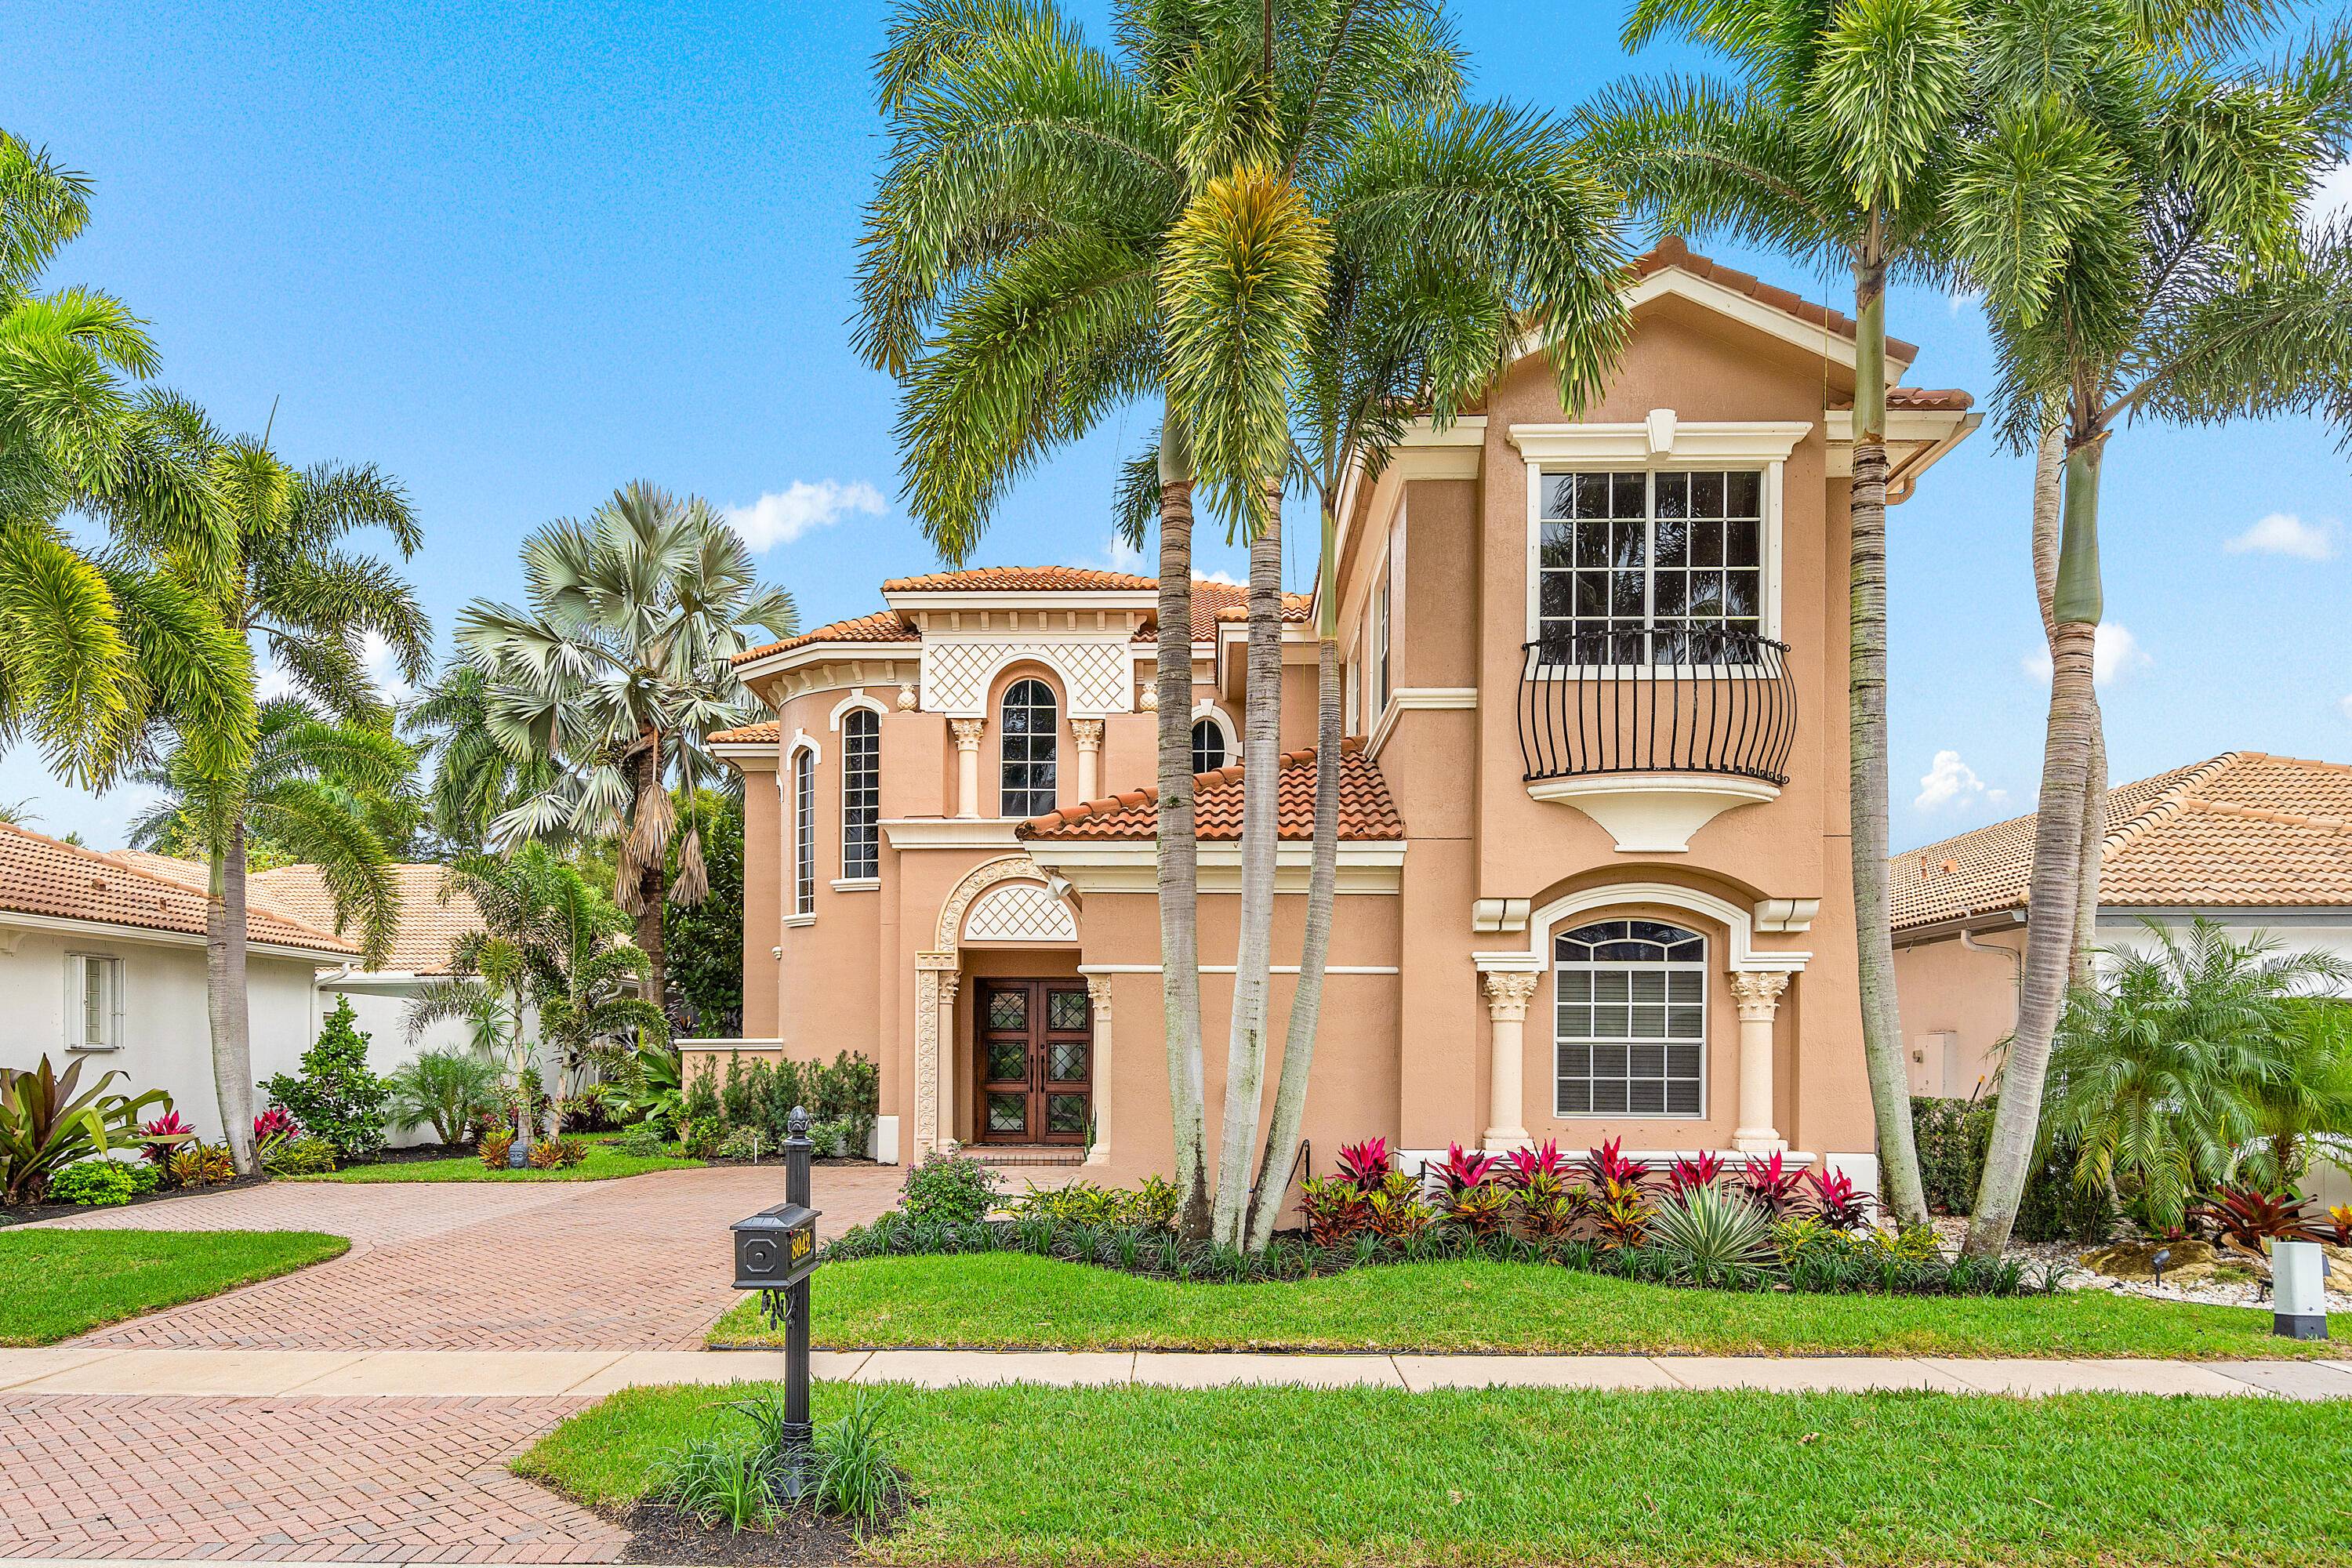 Stunning 2 story, 4 bedroom, 5 bath home in Mizner Country Club.